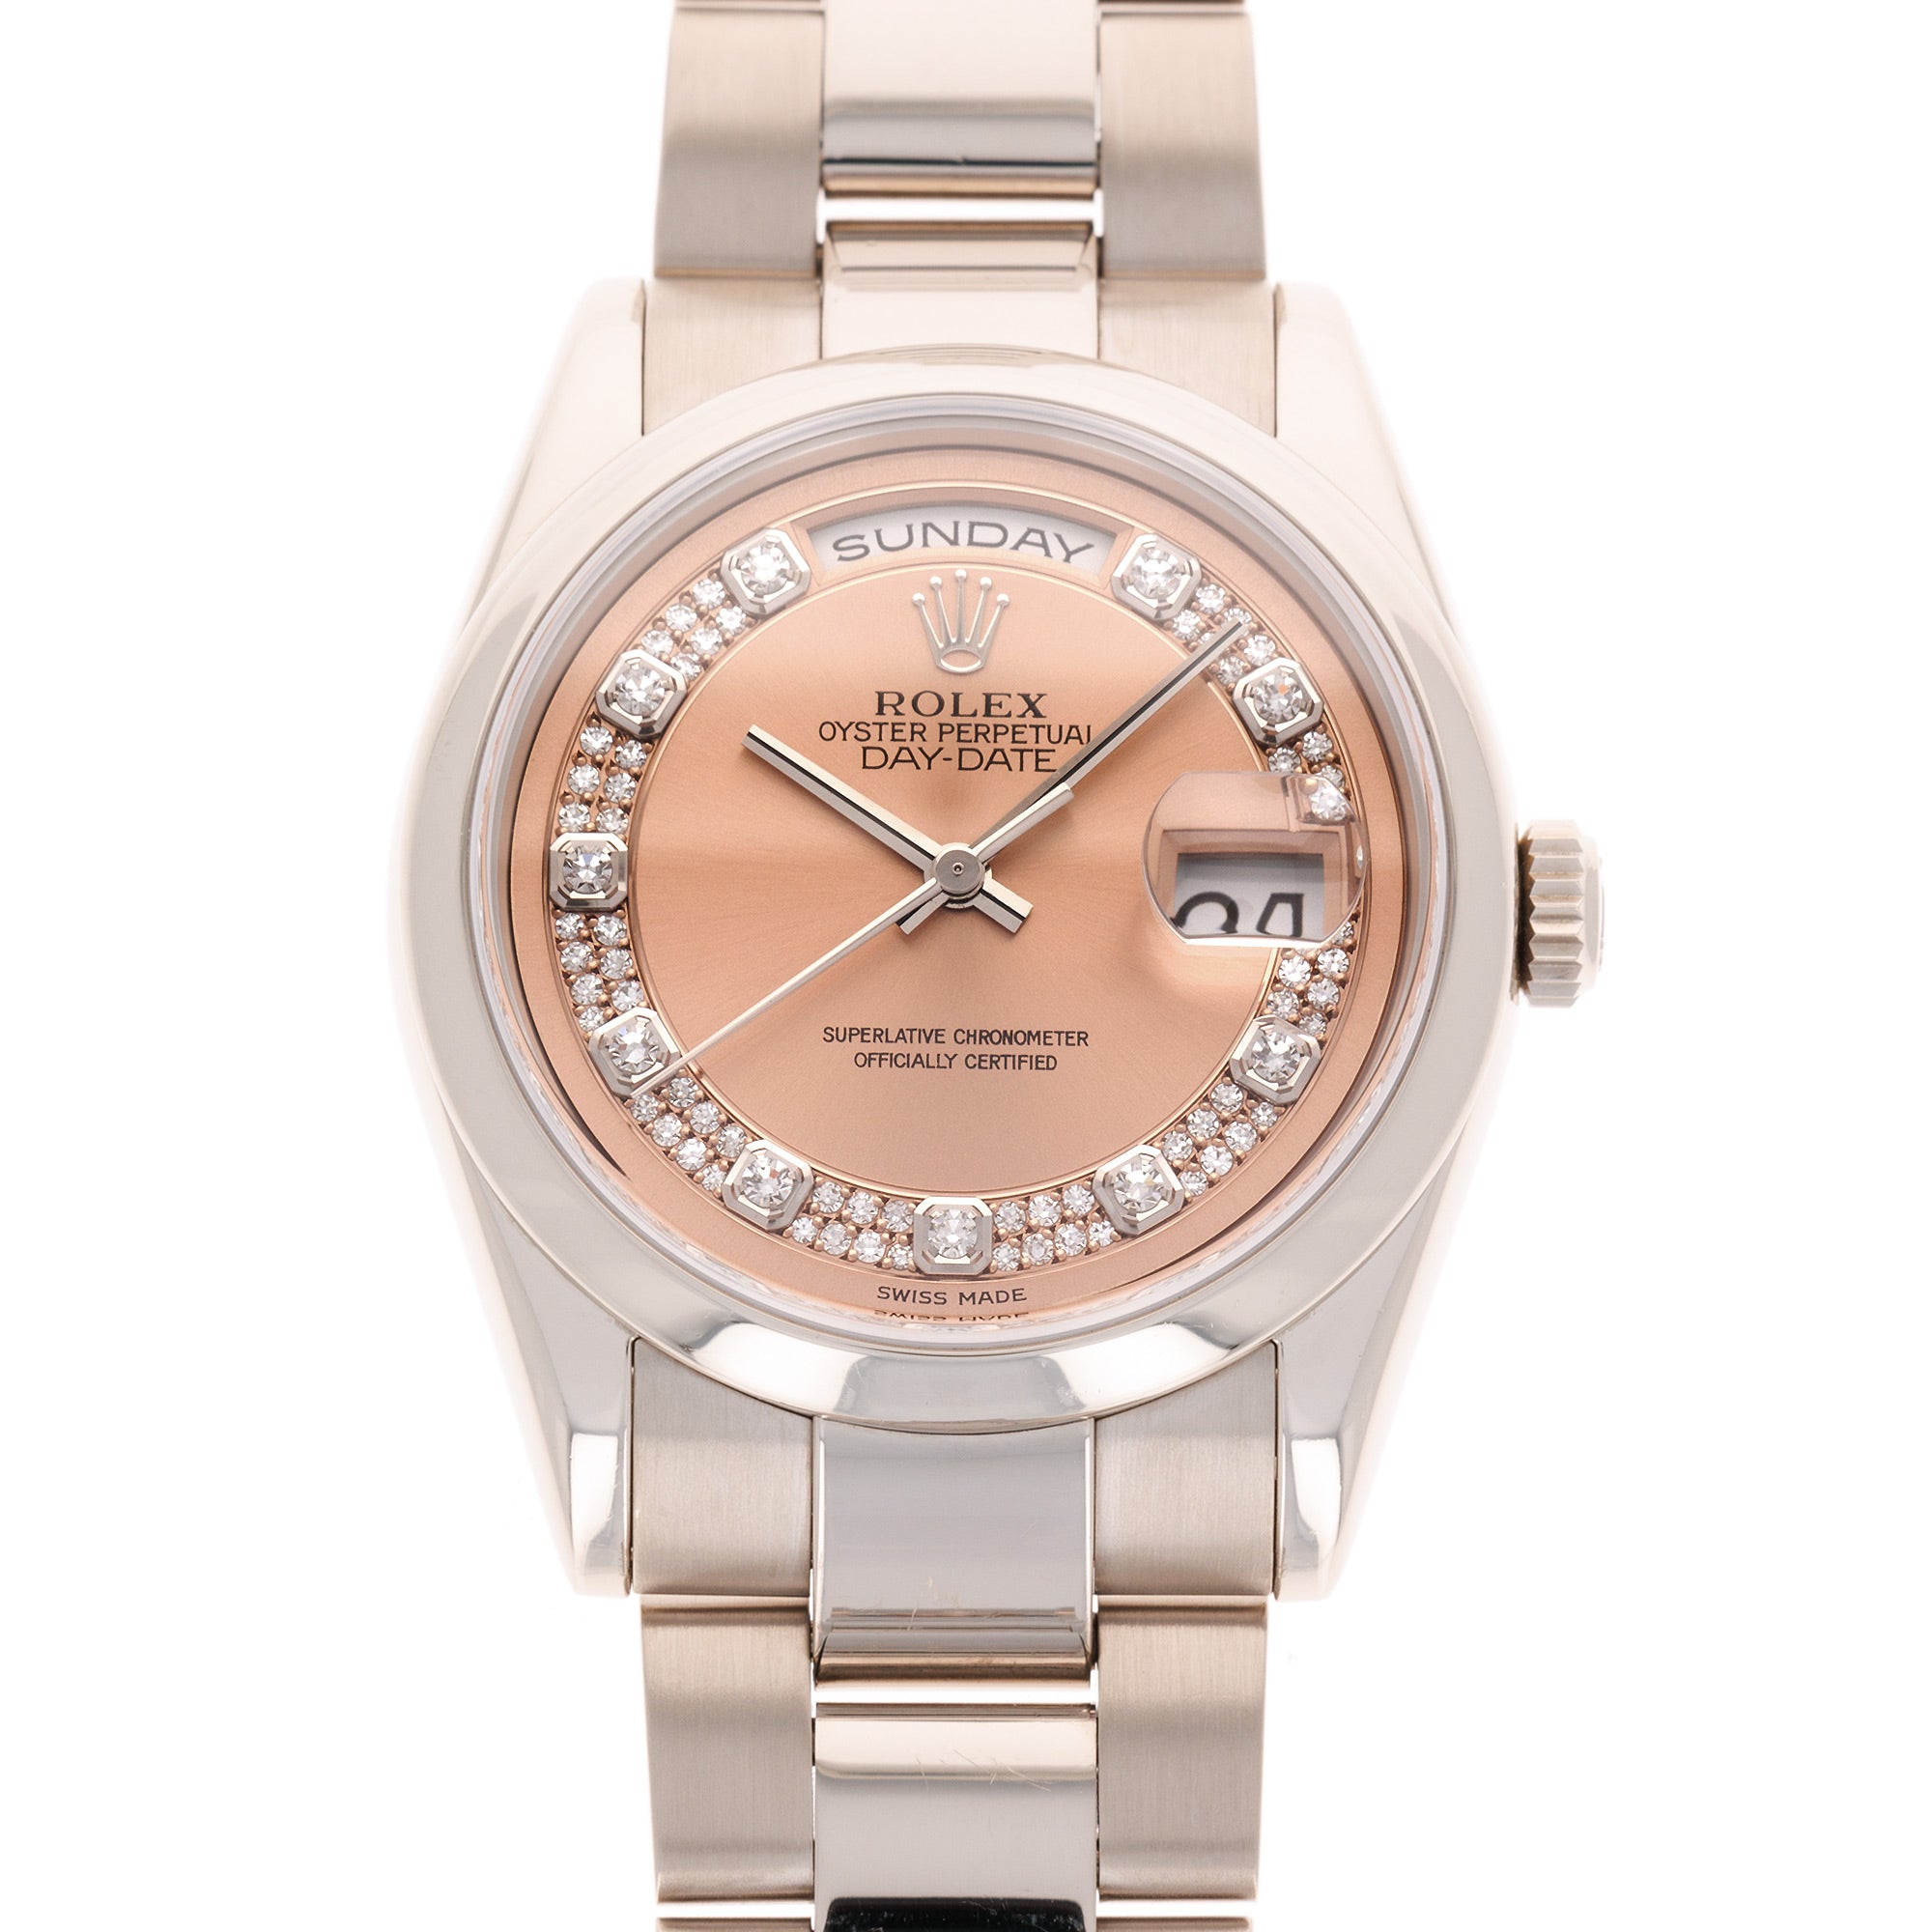 Rolex - Rolex White Gold Salmon Dial Day-Date Ref. 118209 - The Keystone Watches